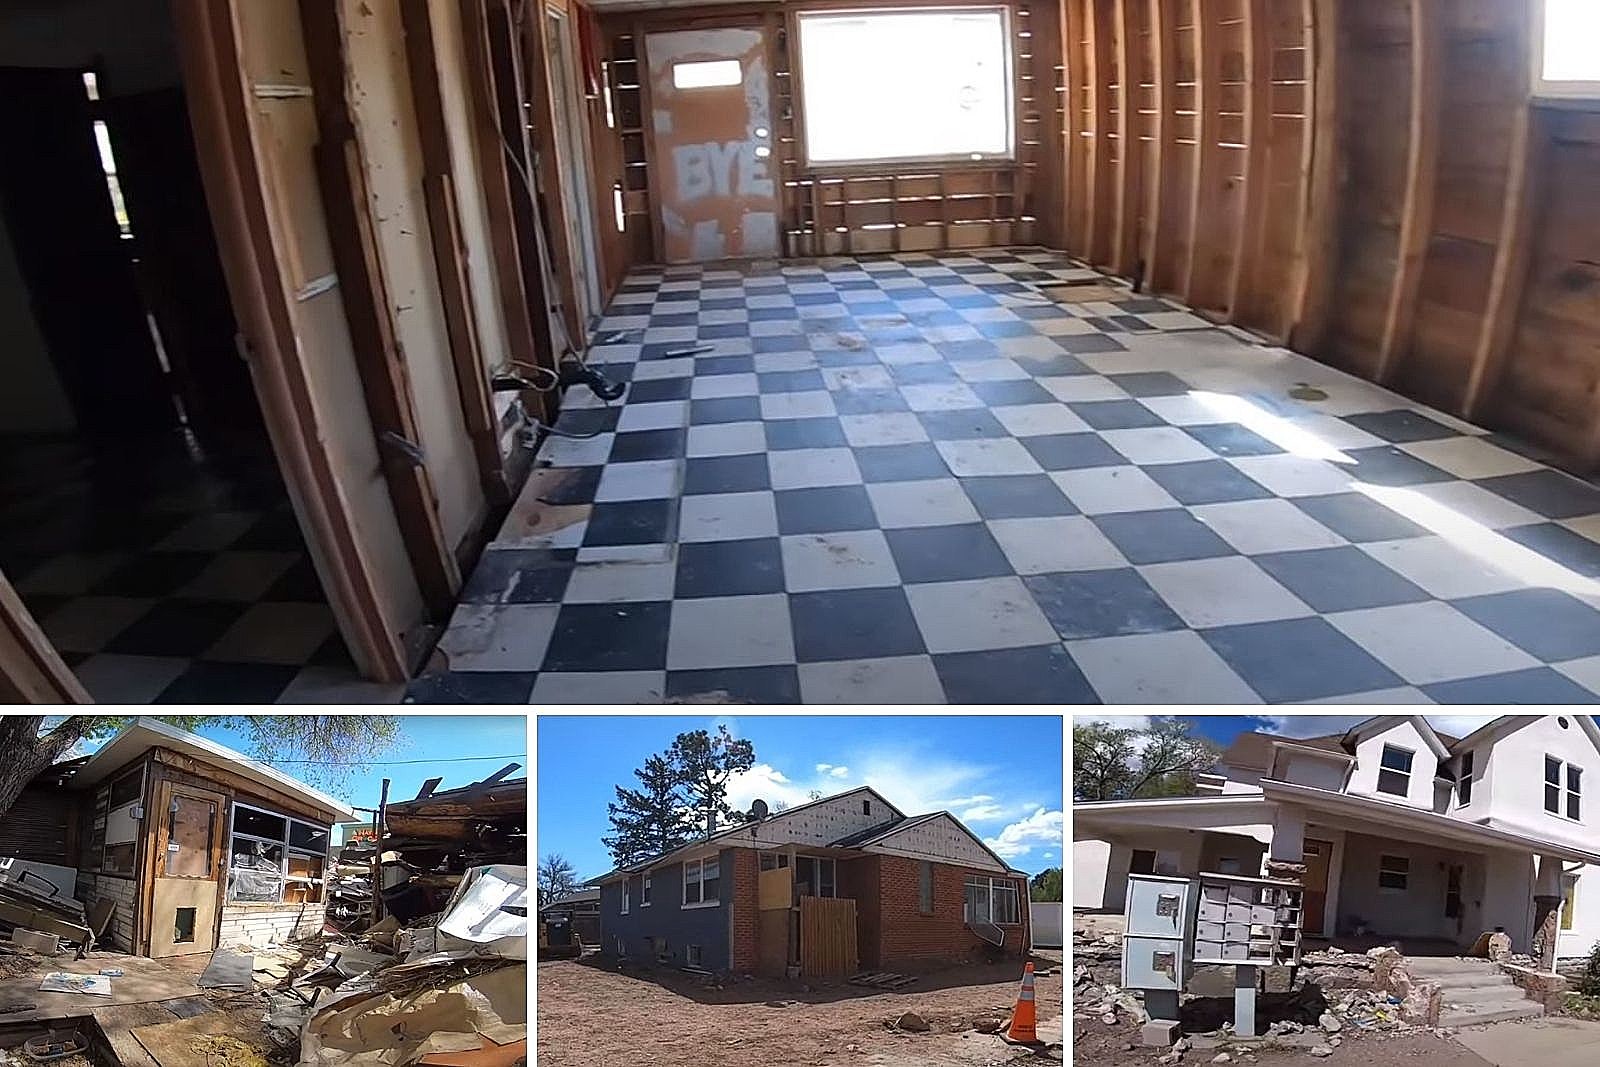 Entire Neighborhood Appears Eerily Abandoned in Colorado Springs picture